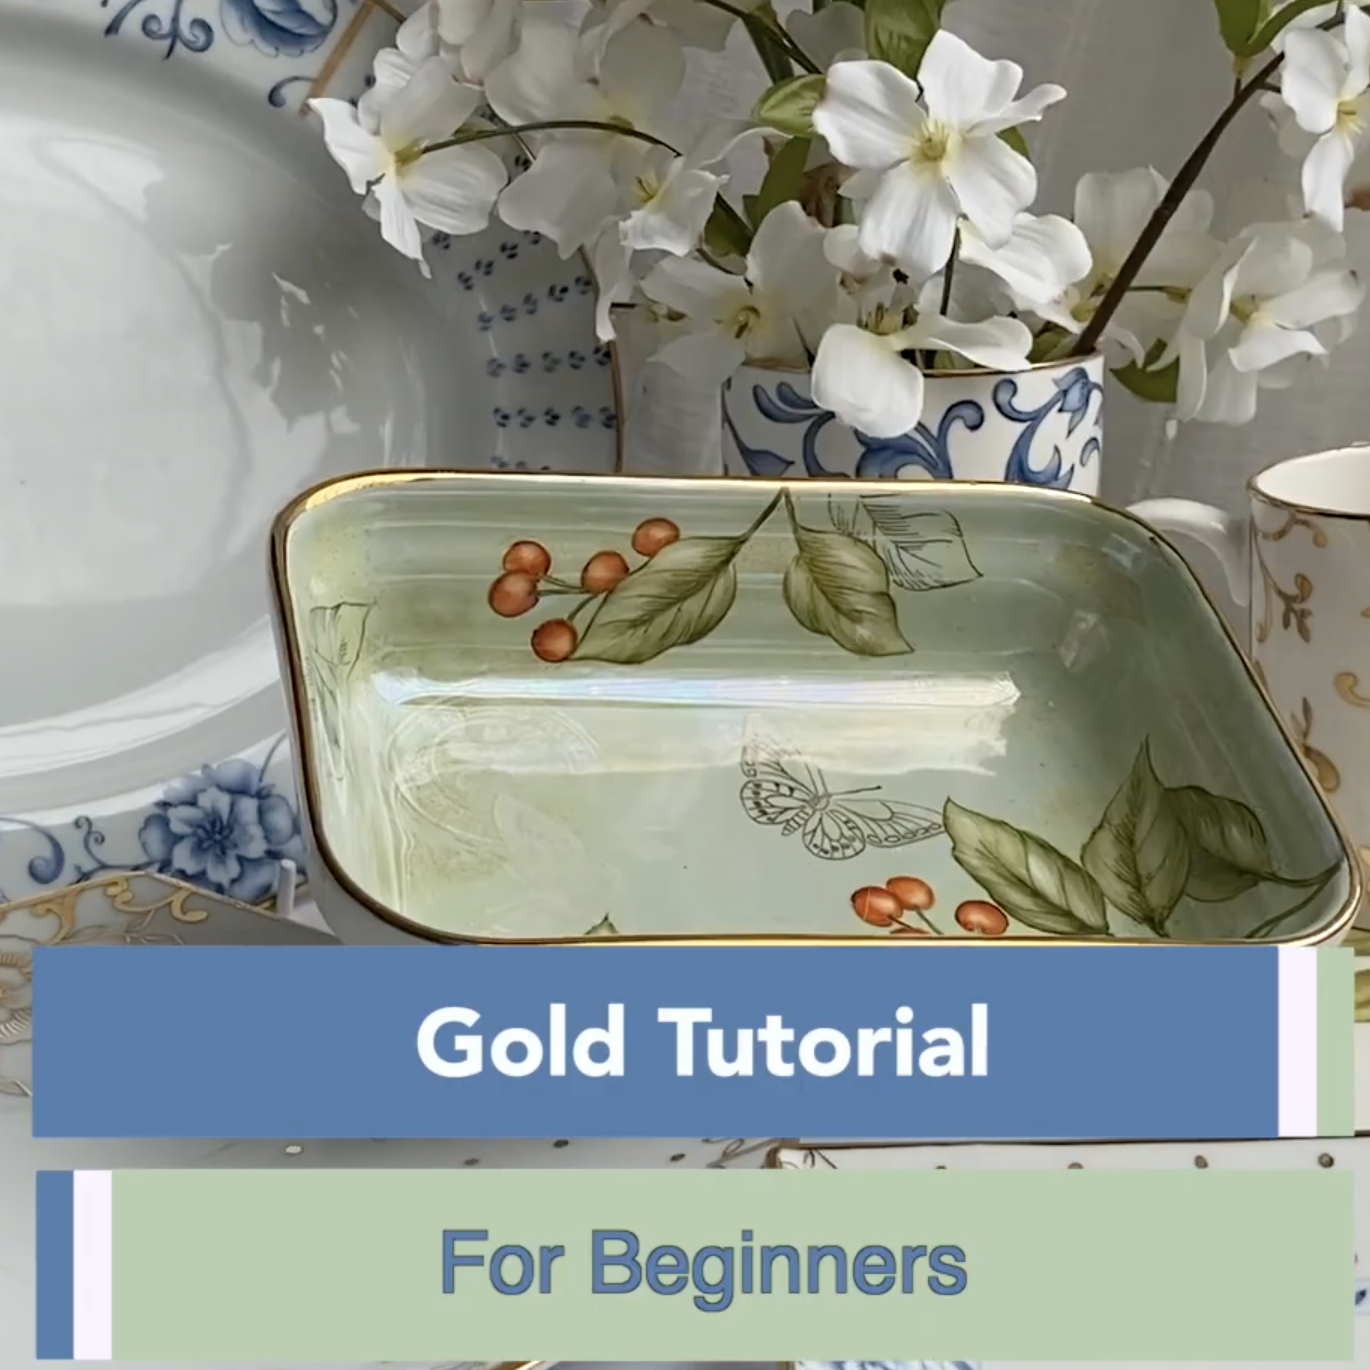 Gold Tutorial for Beginners